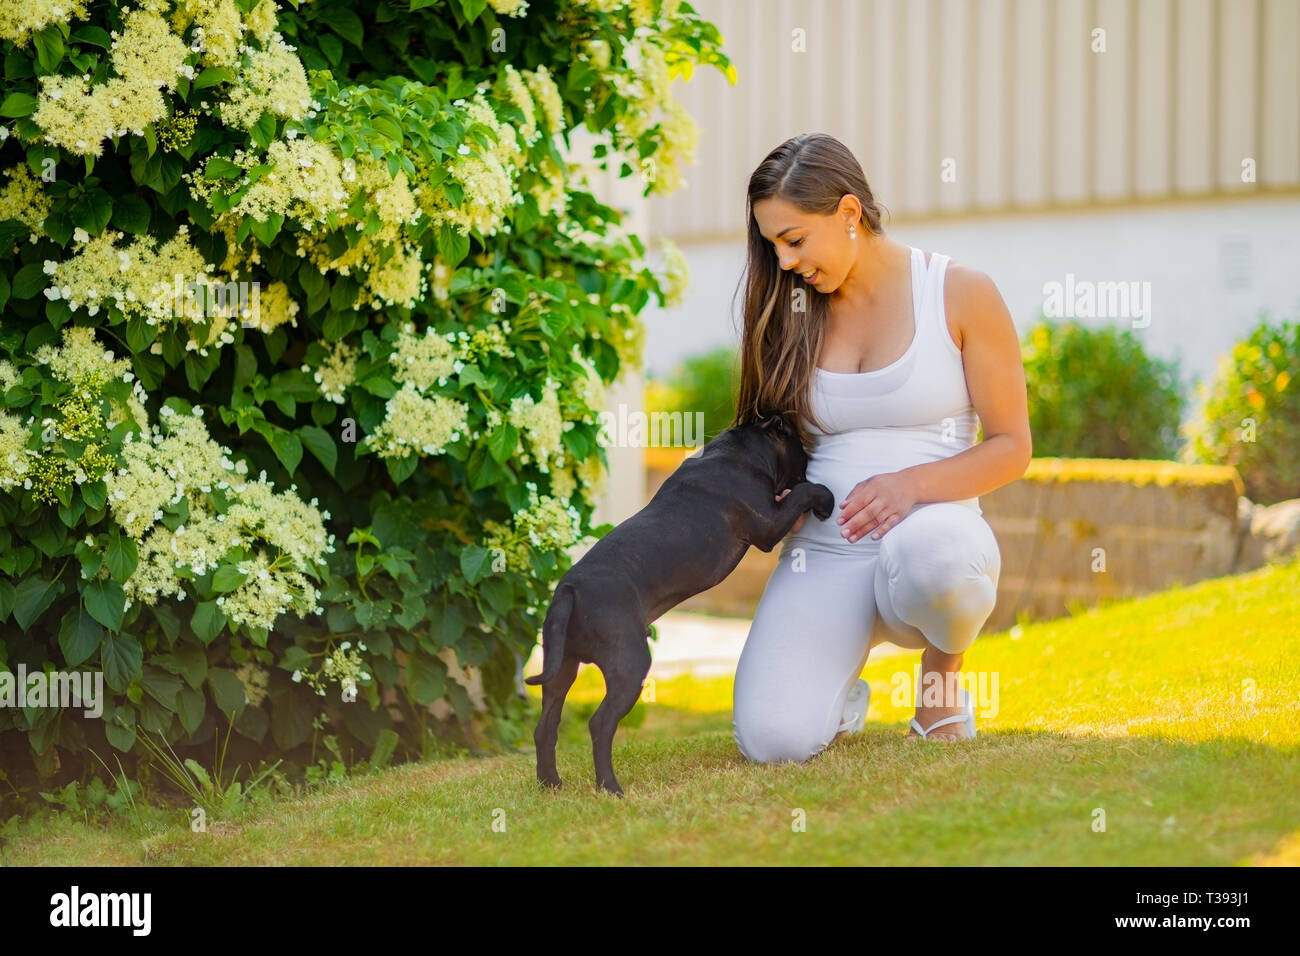 Smiling Pregnant Woman With A Big Belly Plays With Her Dog In The